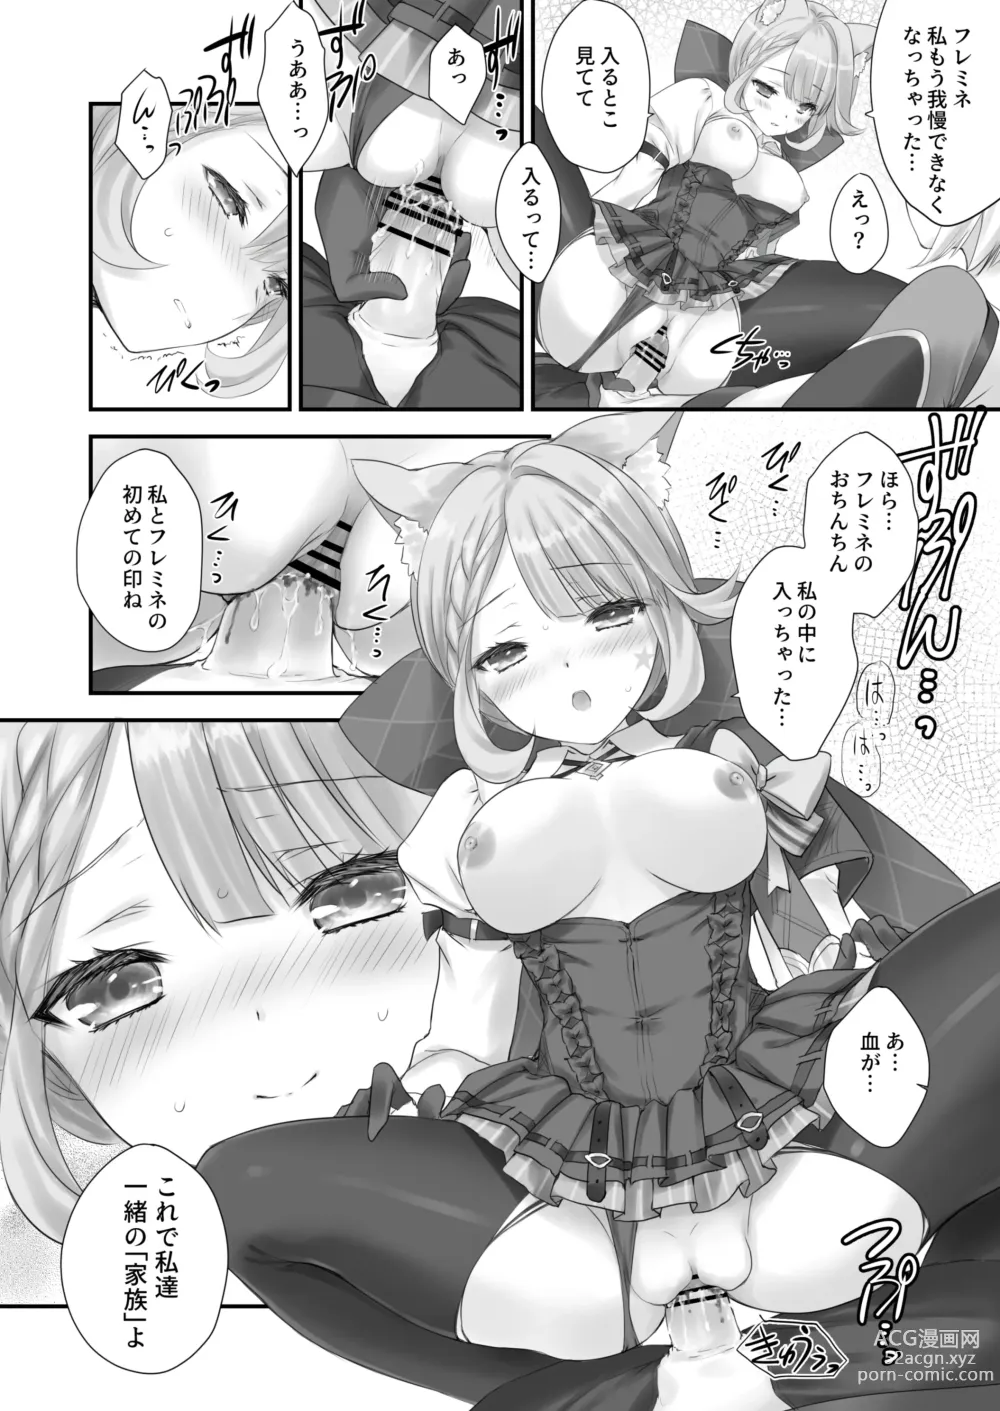 Page 13 of doujinshi Love Marionette Magic